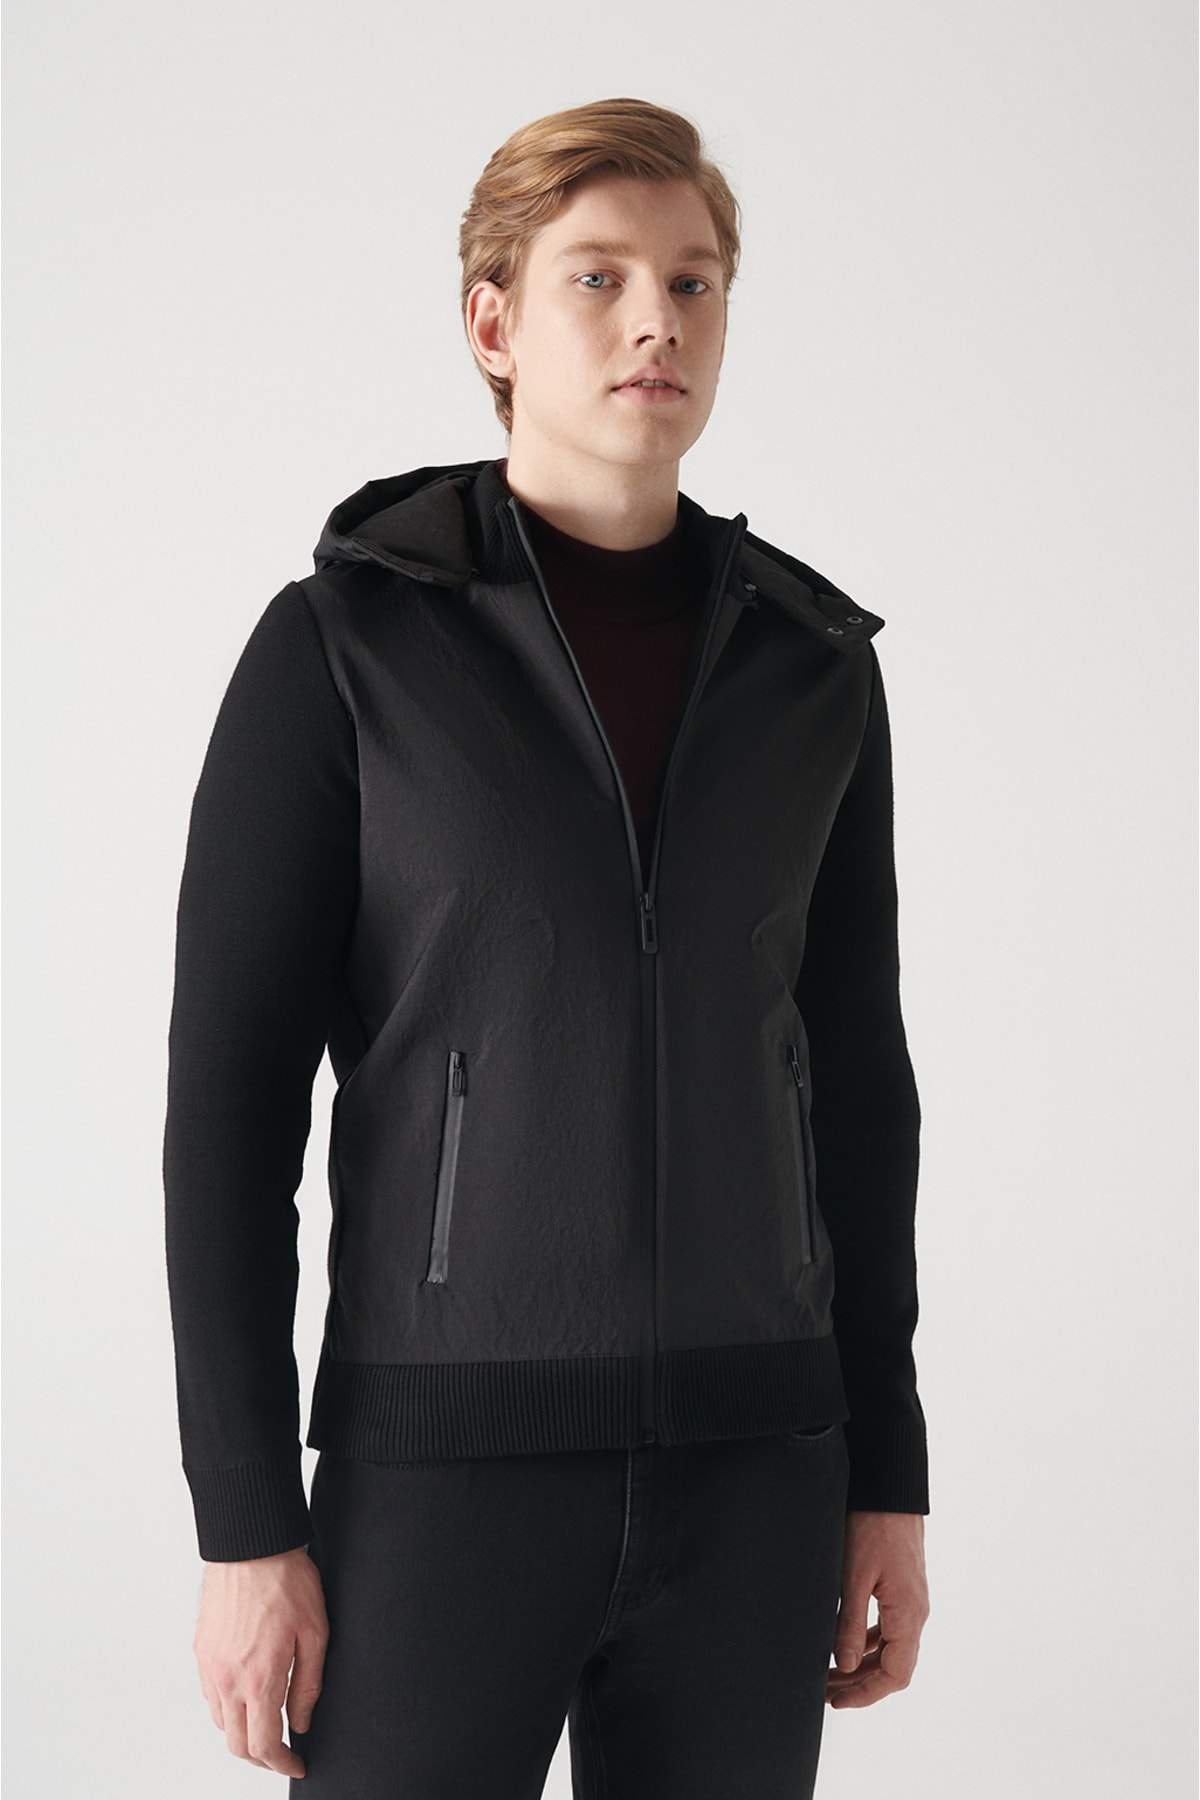 mens-black-hooded-collar-front-parachute-fabric-detailed-zippered-wool-coat-a22y6014